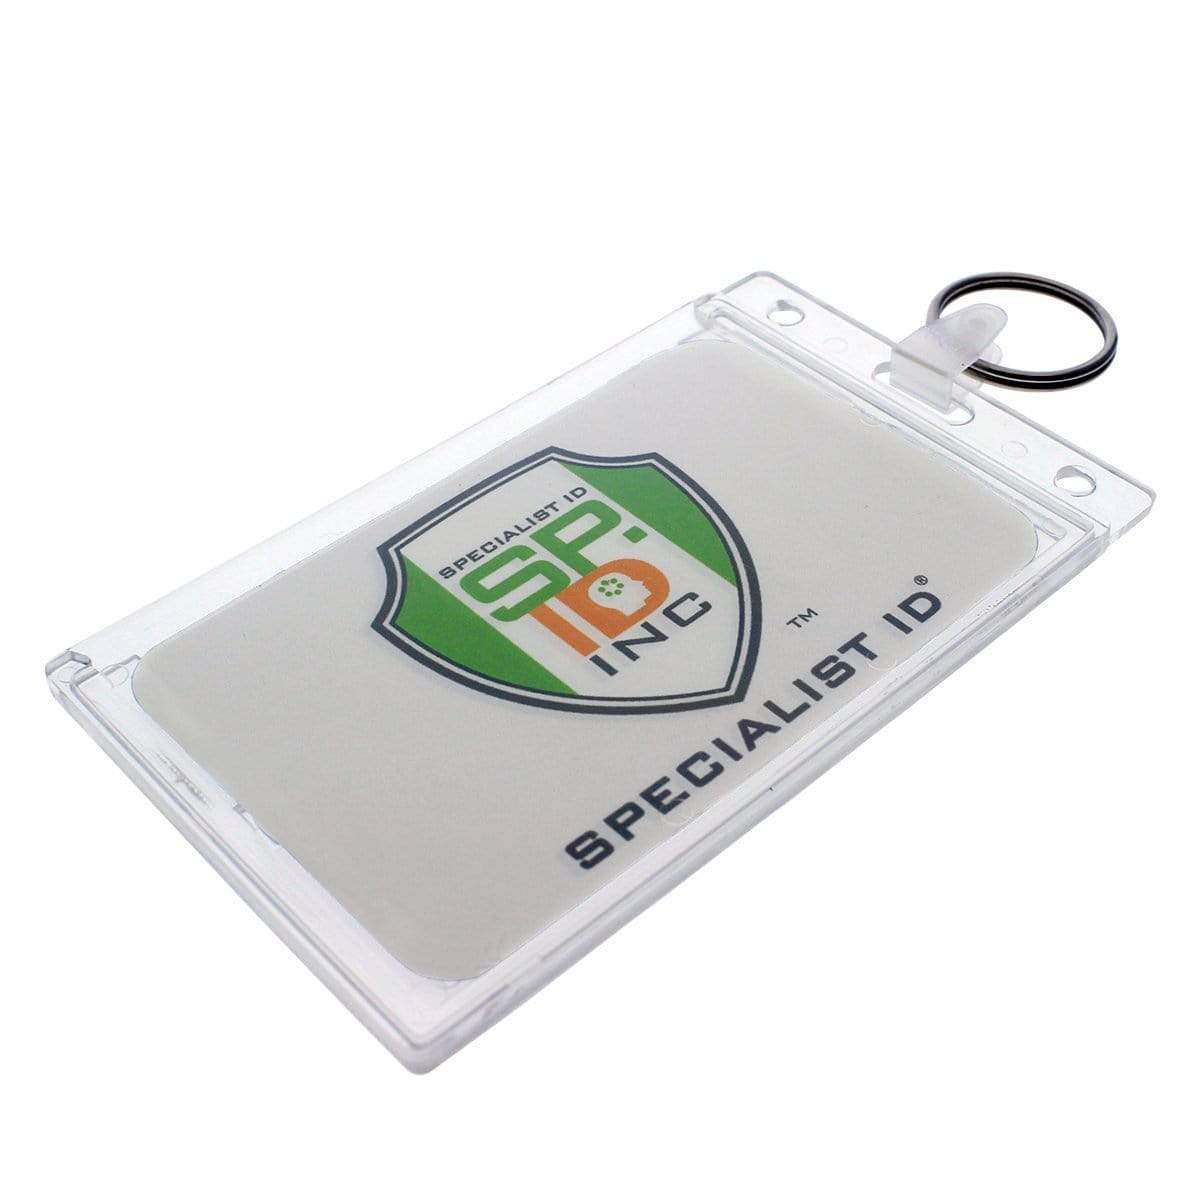 5 Pack - Heavy Duty Fuel Card/Id Badge Holders with Keyring - Holds Two Cards - Clear Rigid Plastic ID Holder Keychain - Attach Keys & Protect